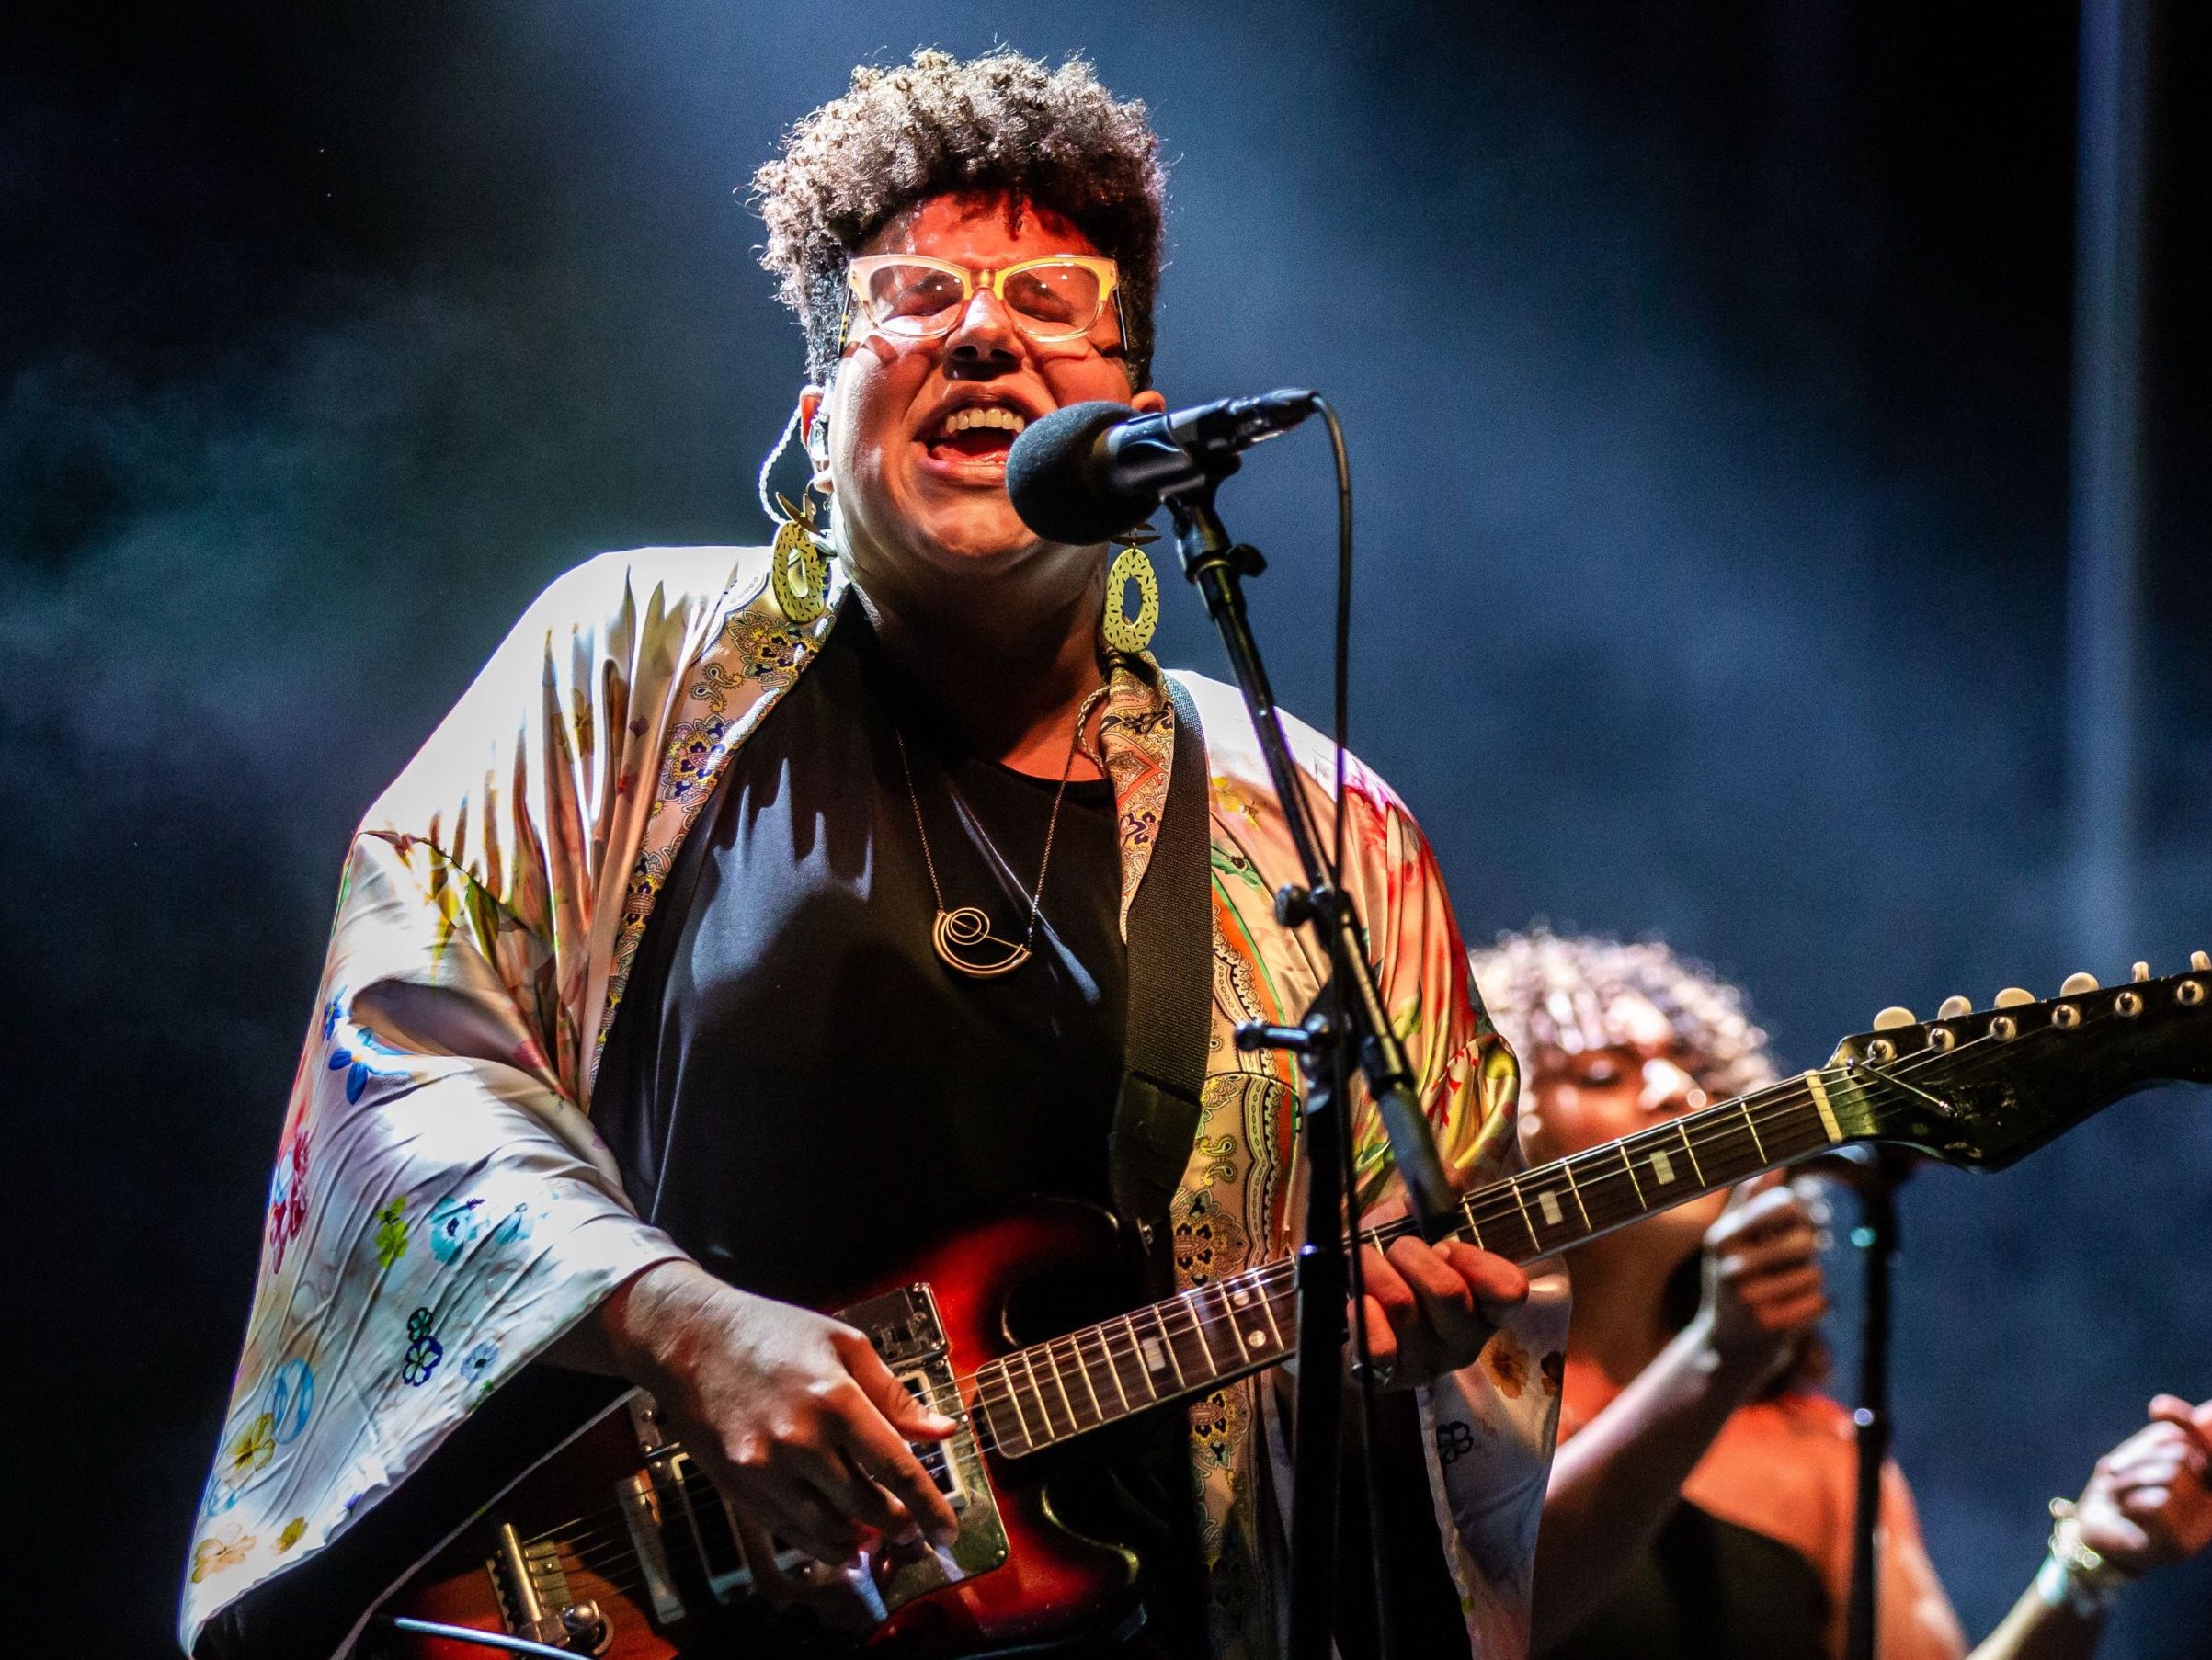 Rock’n’roll spirit: Musician Brittany Howard performing at Afropunk festival in 2019